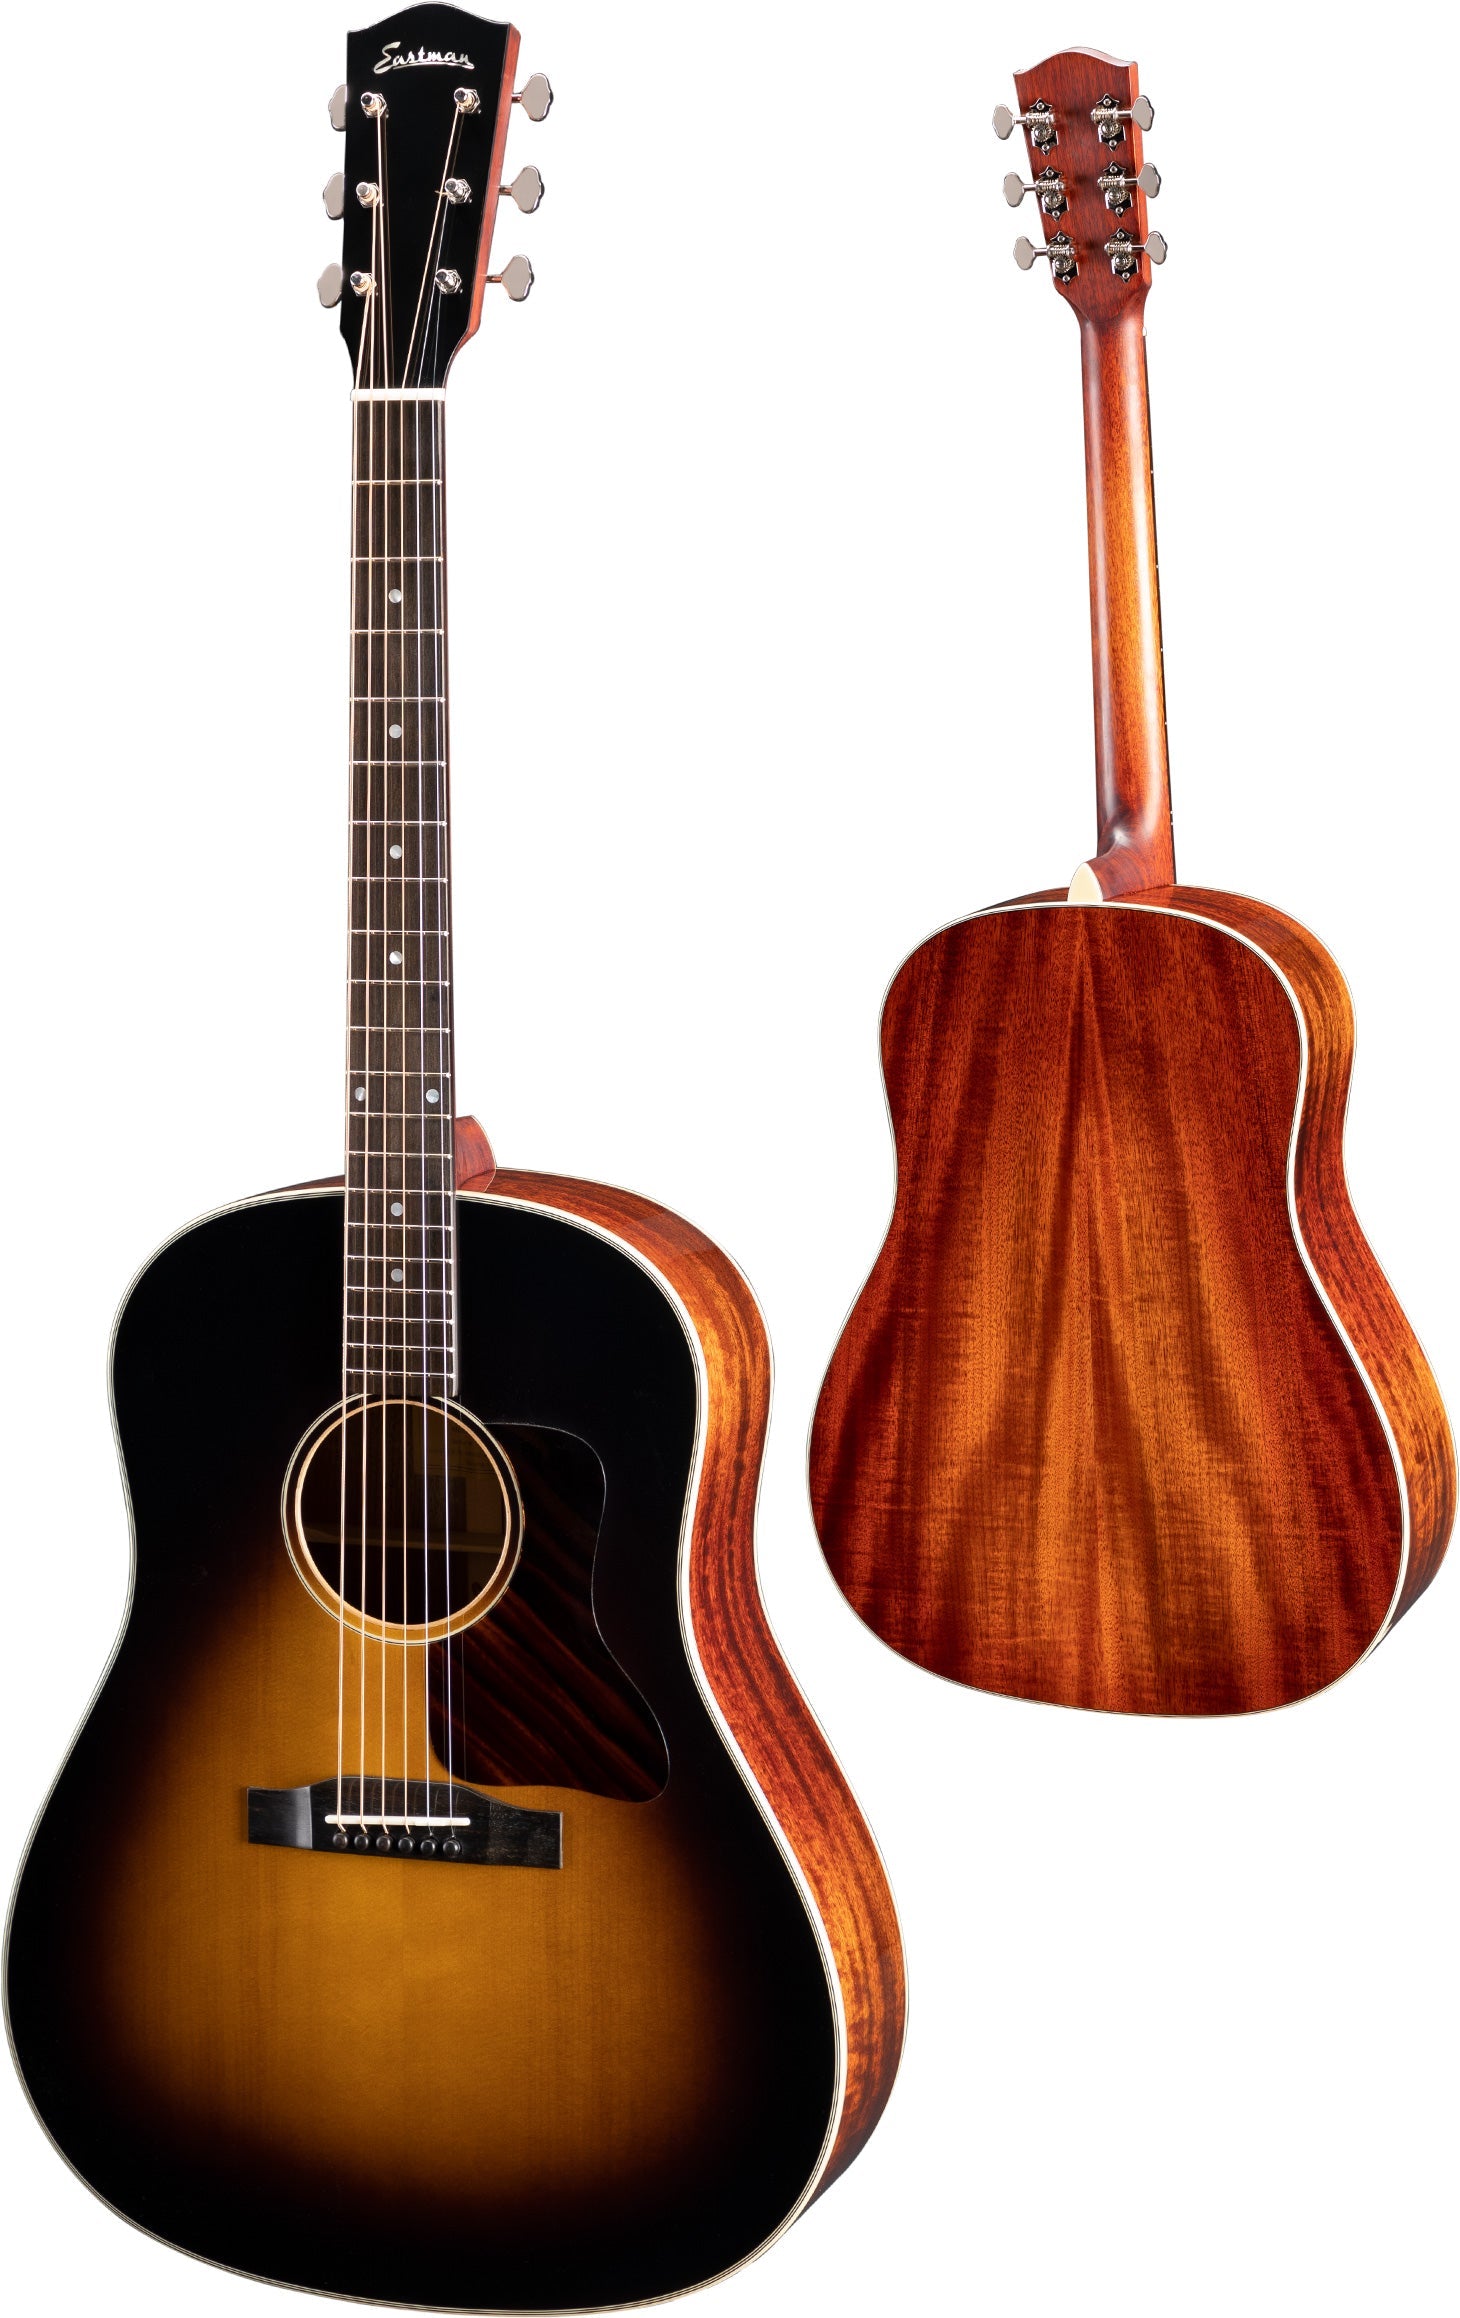 Eastman E10SS Dreadnought, Acoustic Guitar for sale at Richards Guitars.